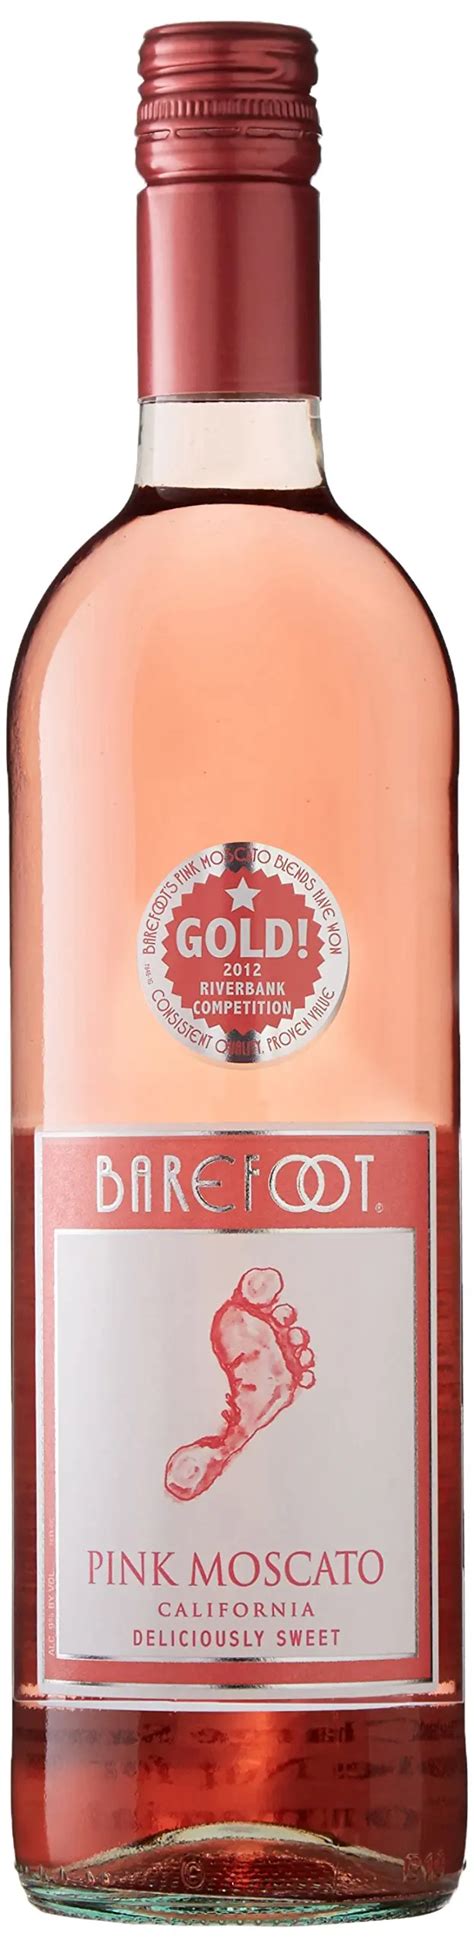 Buy Barefoot Cellars California Pink Moscato Plastic And Portable Mini